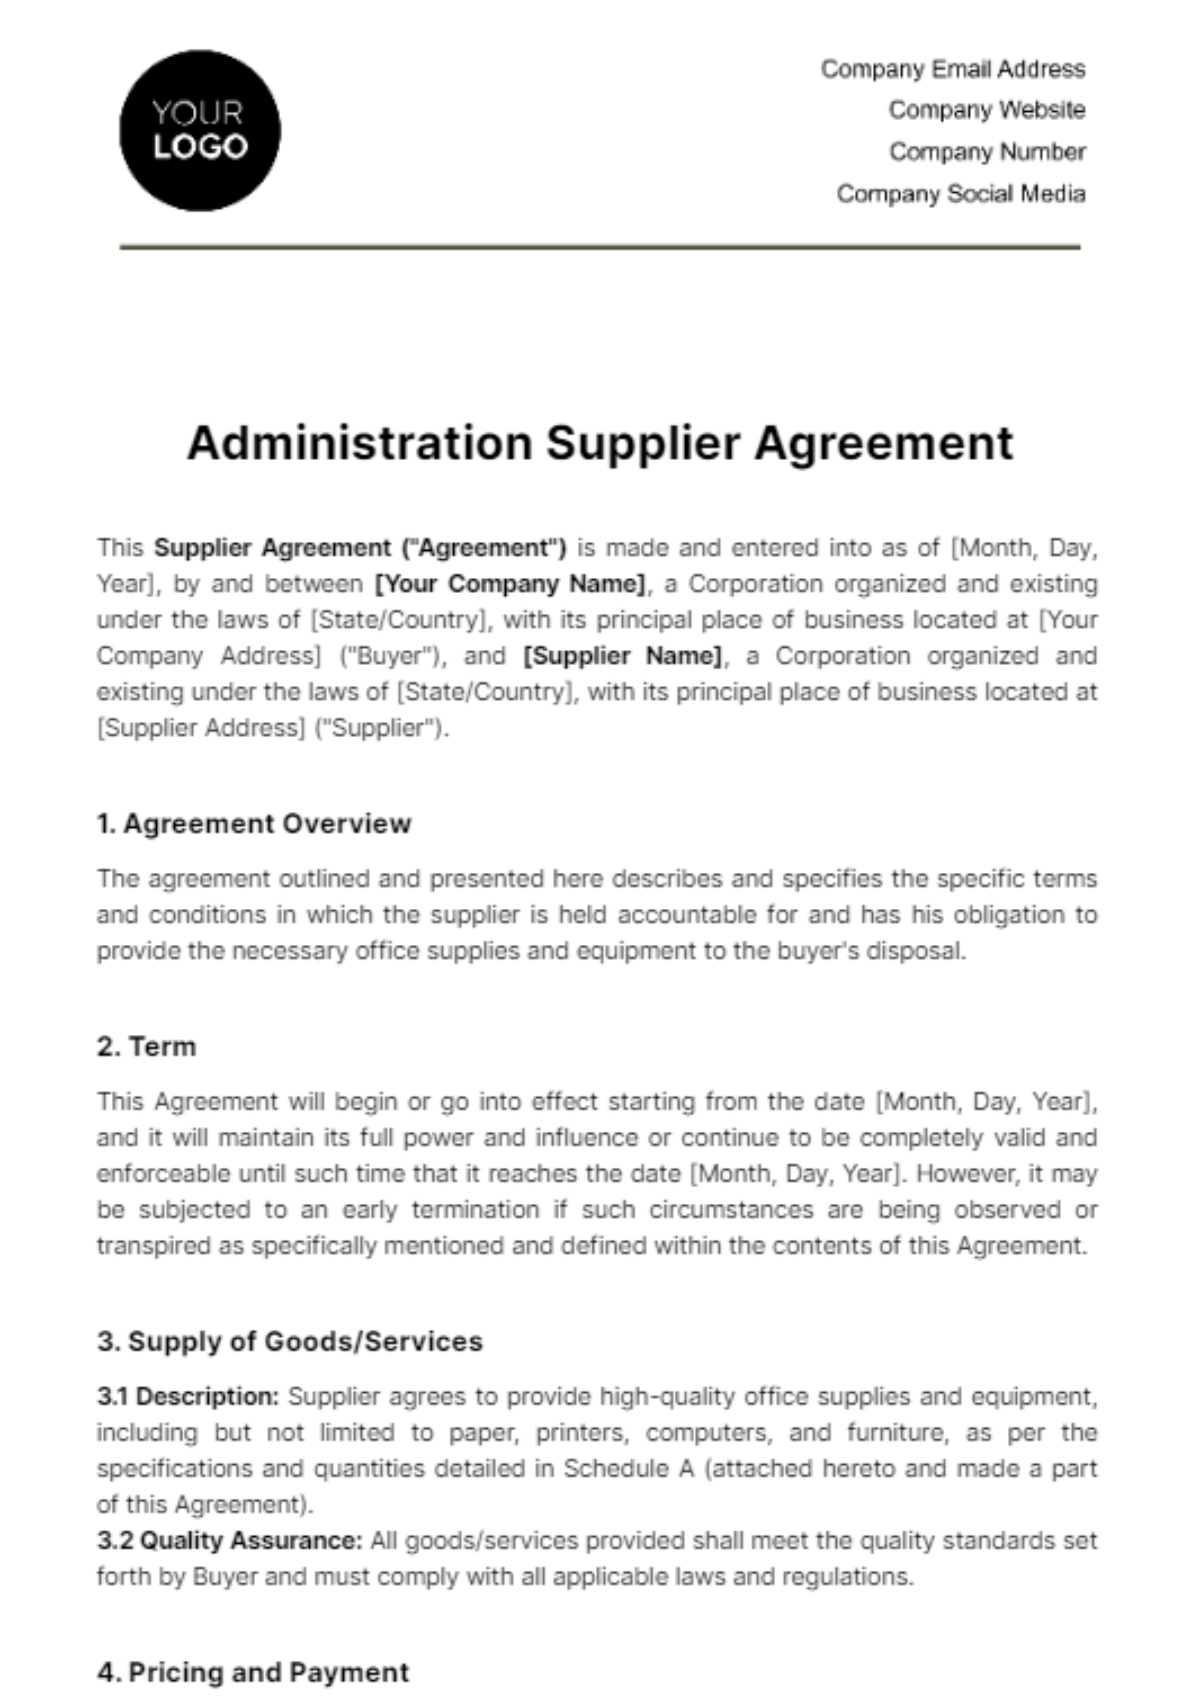 Free Administration Supplier Agreement Template